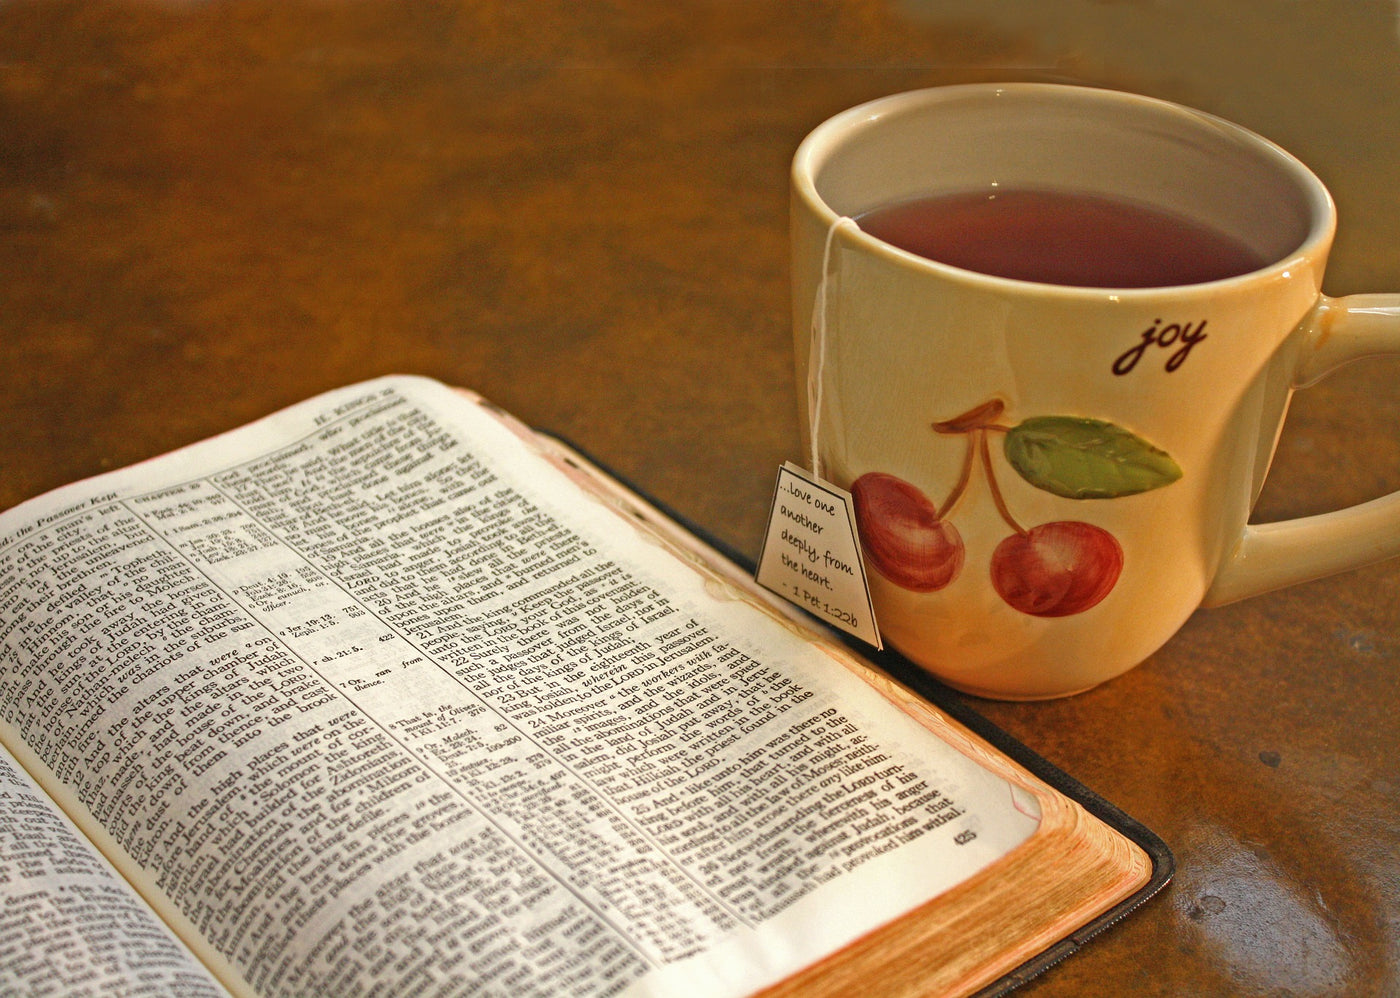 Just the thing for "Quiet Time." A "spot of tea" and God's Word